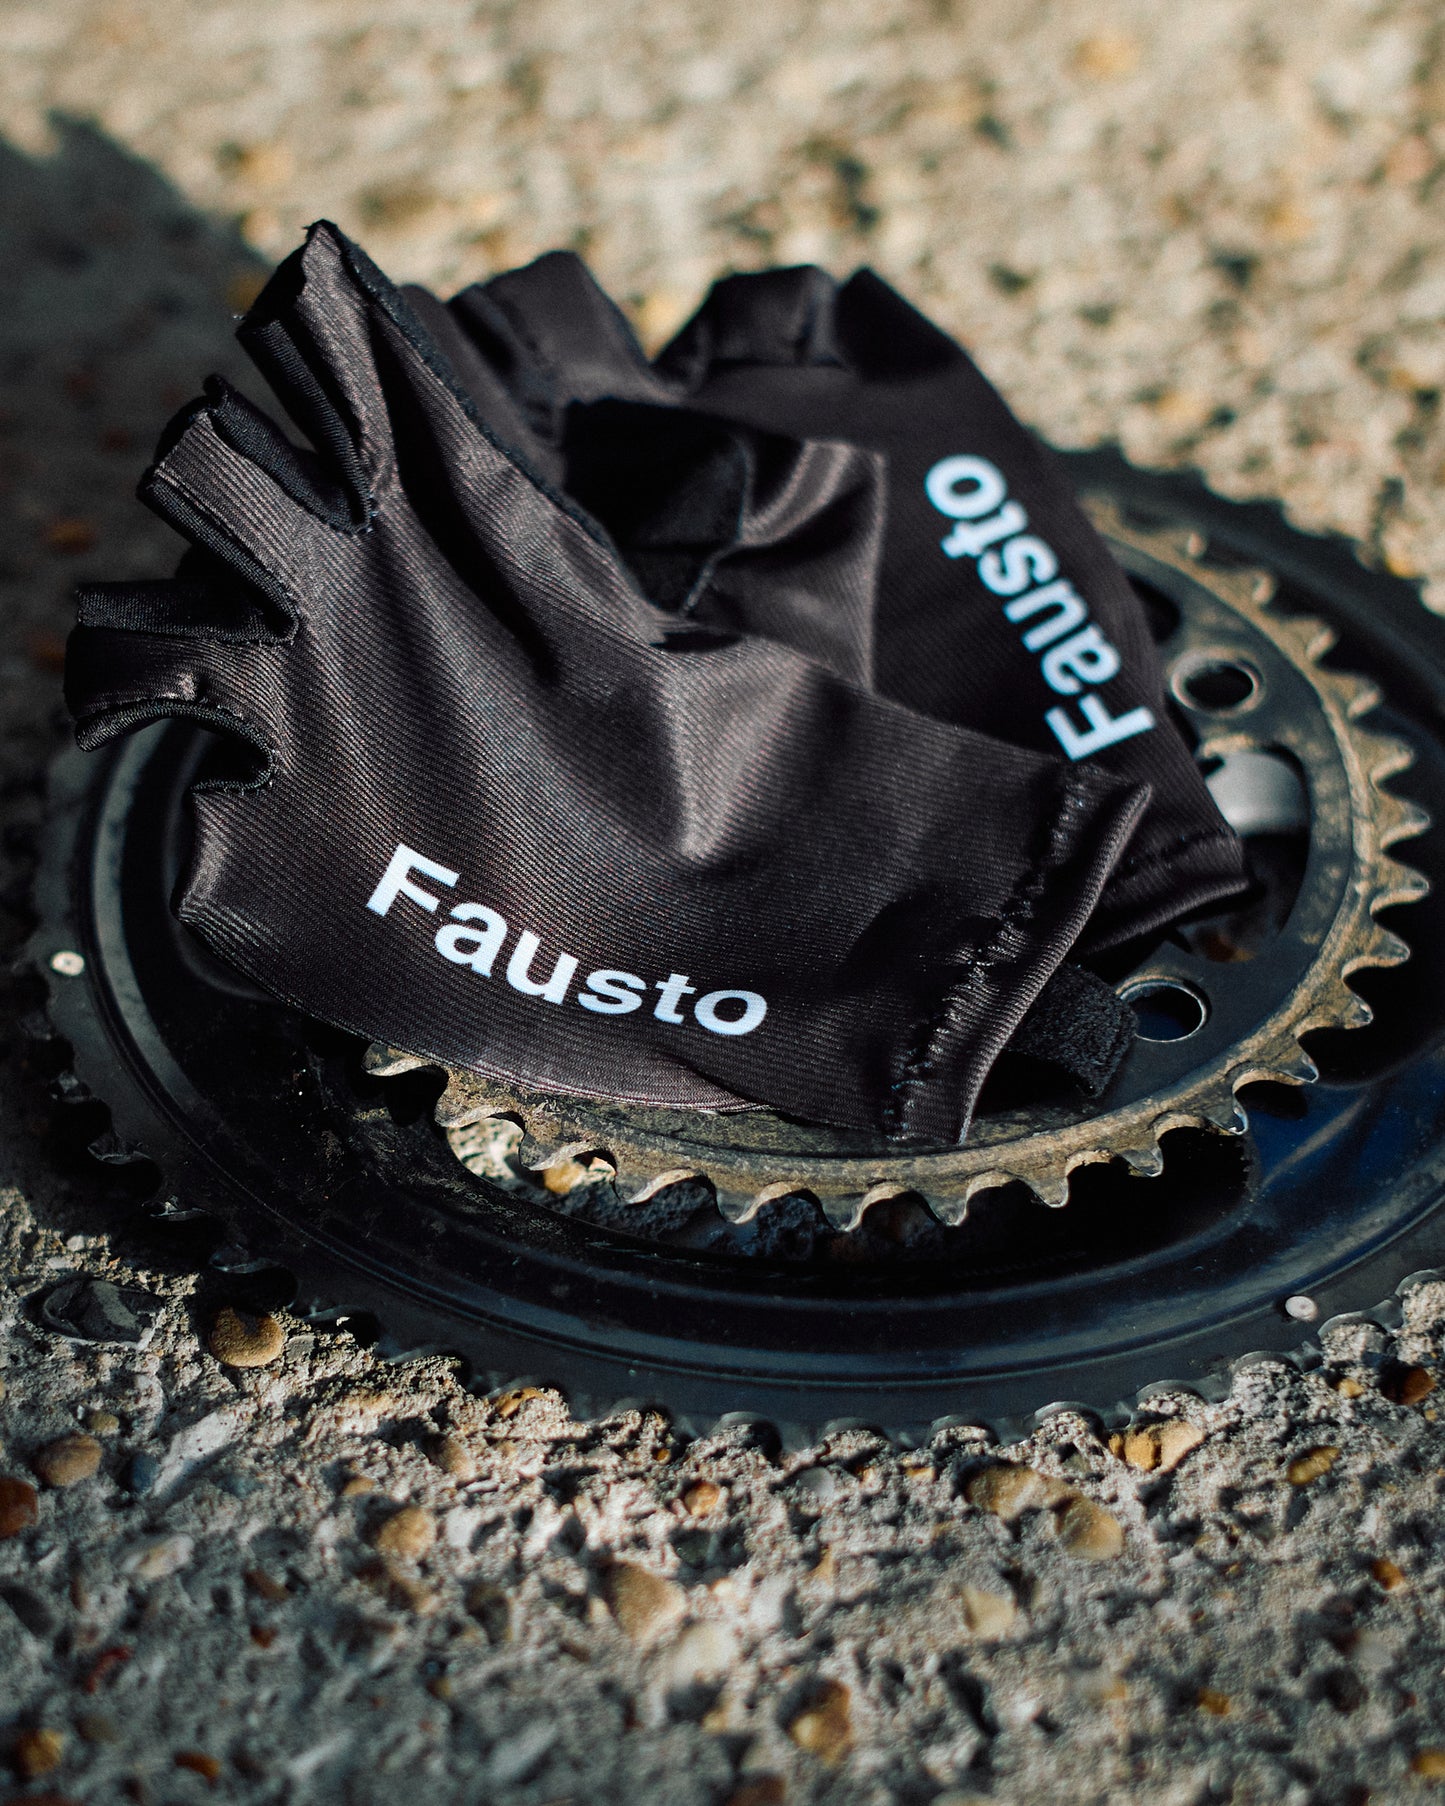 Fausto Cycling Gloves - Unisex